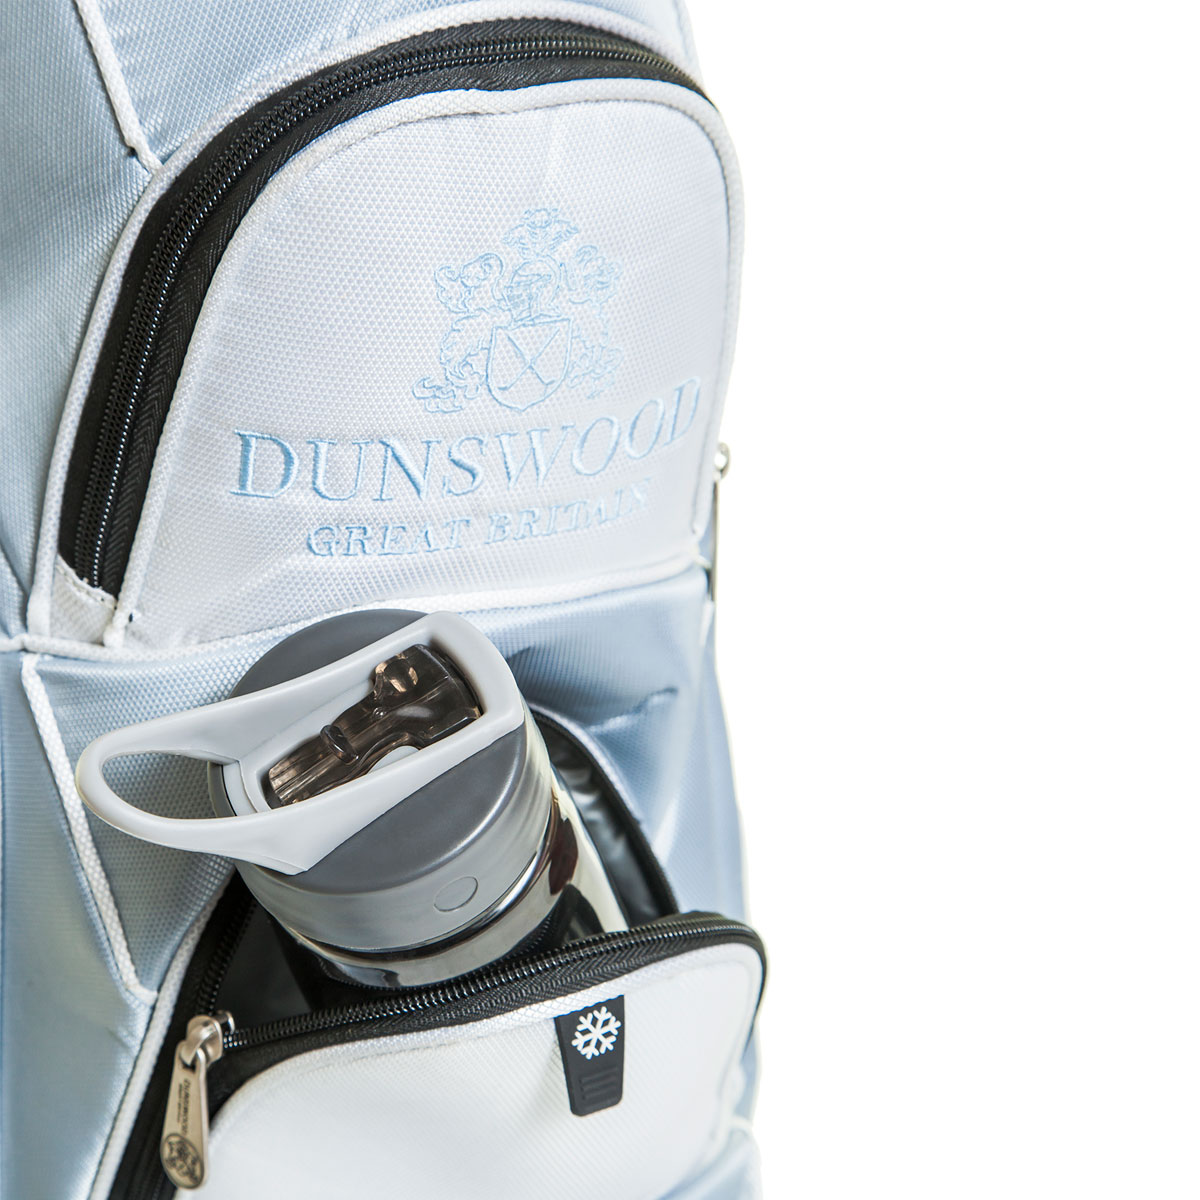 Pocket detail of the Knight Cart Bag with a water bottle